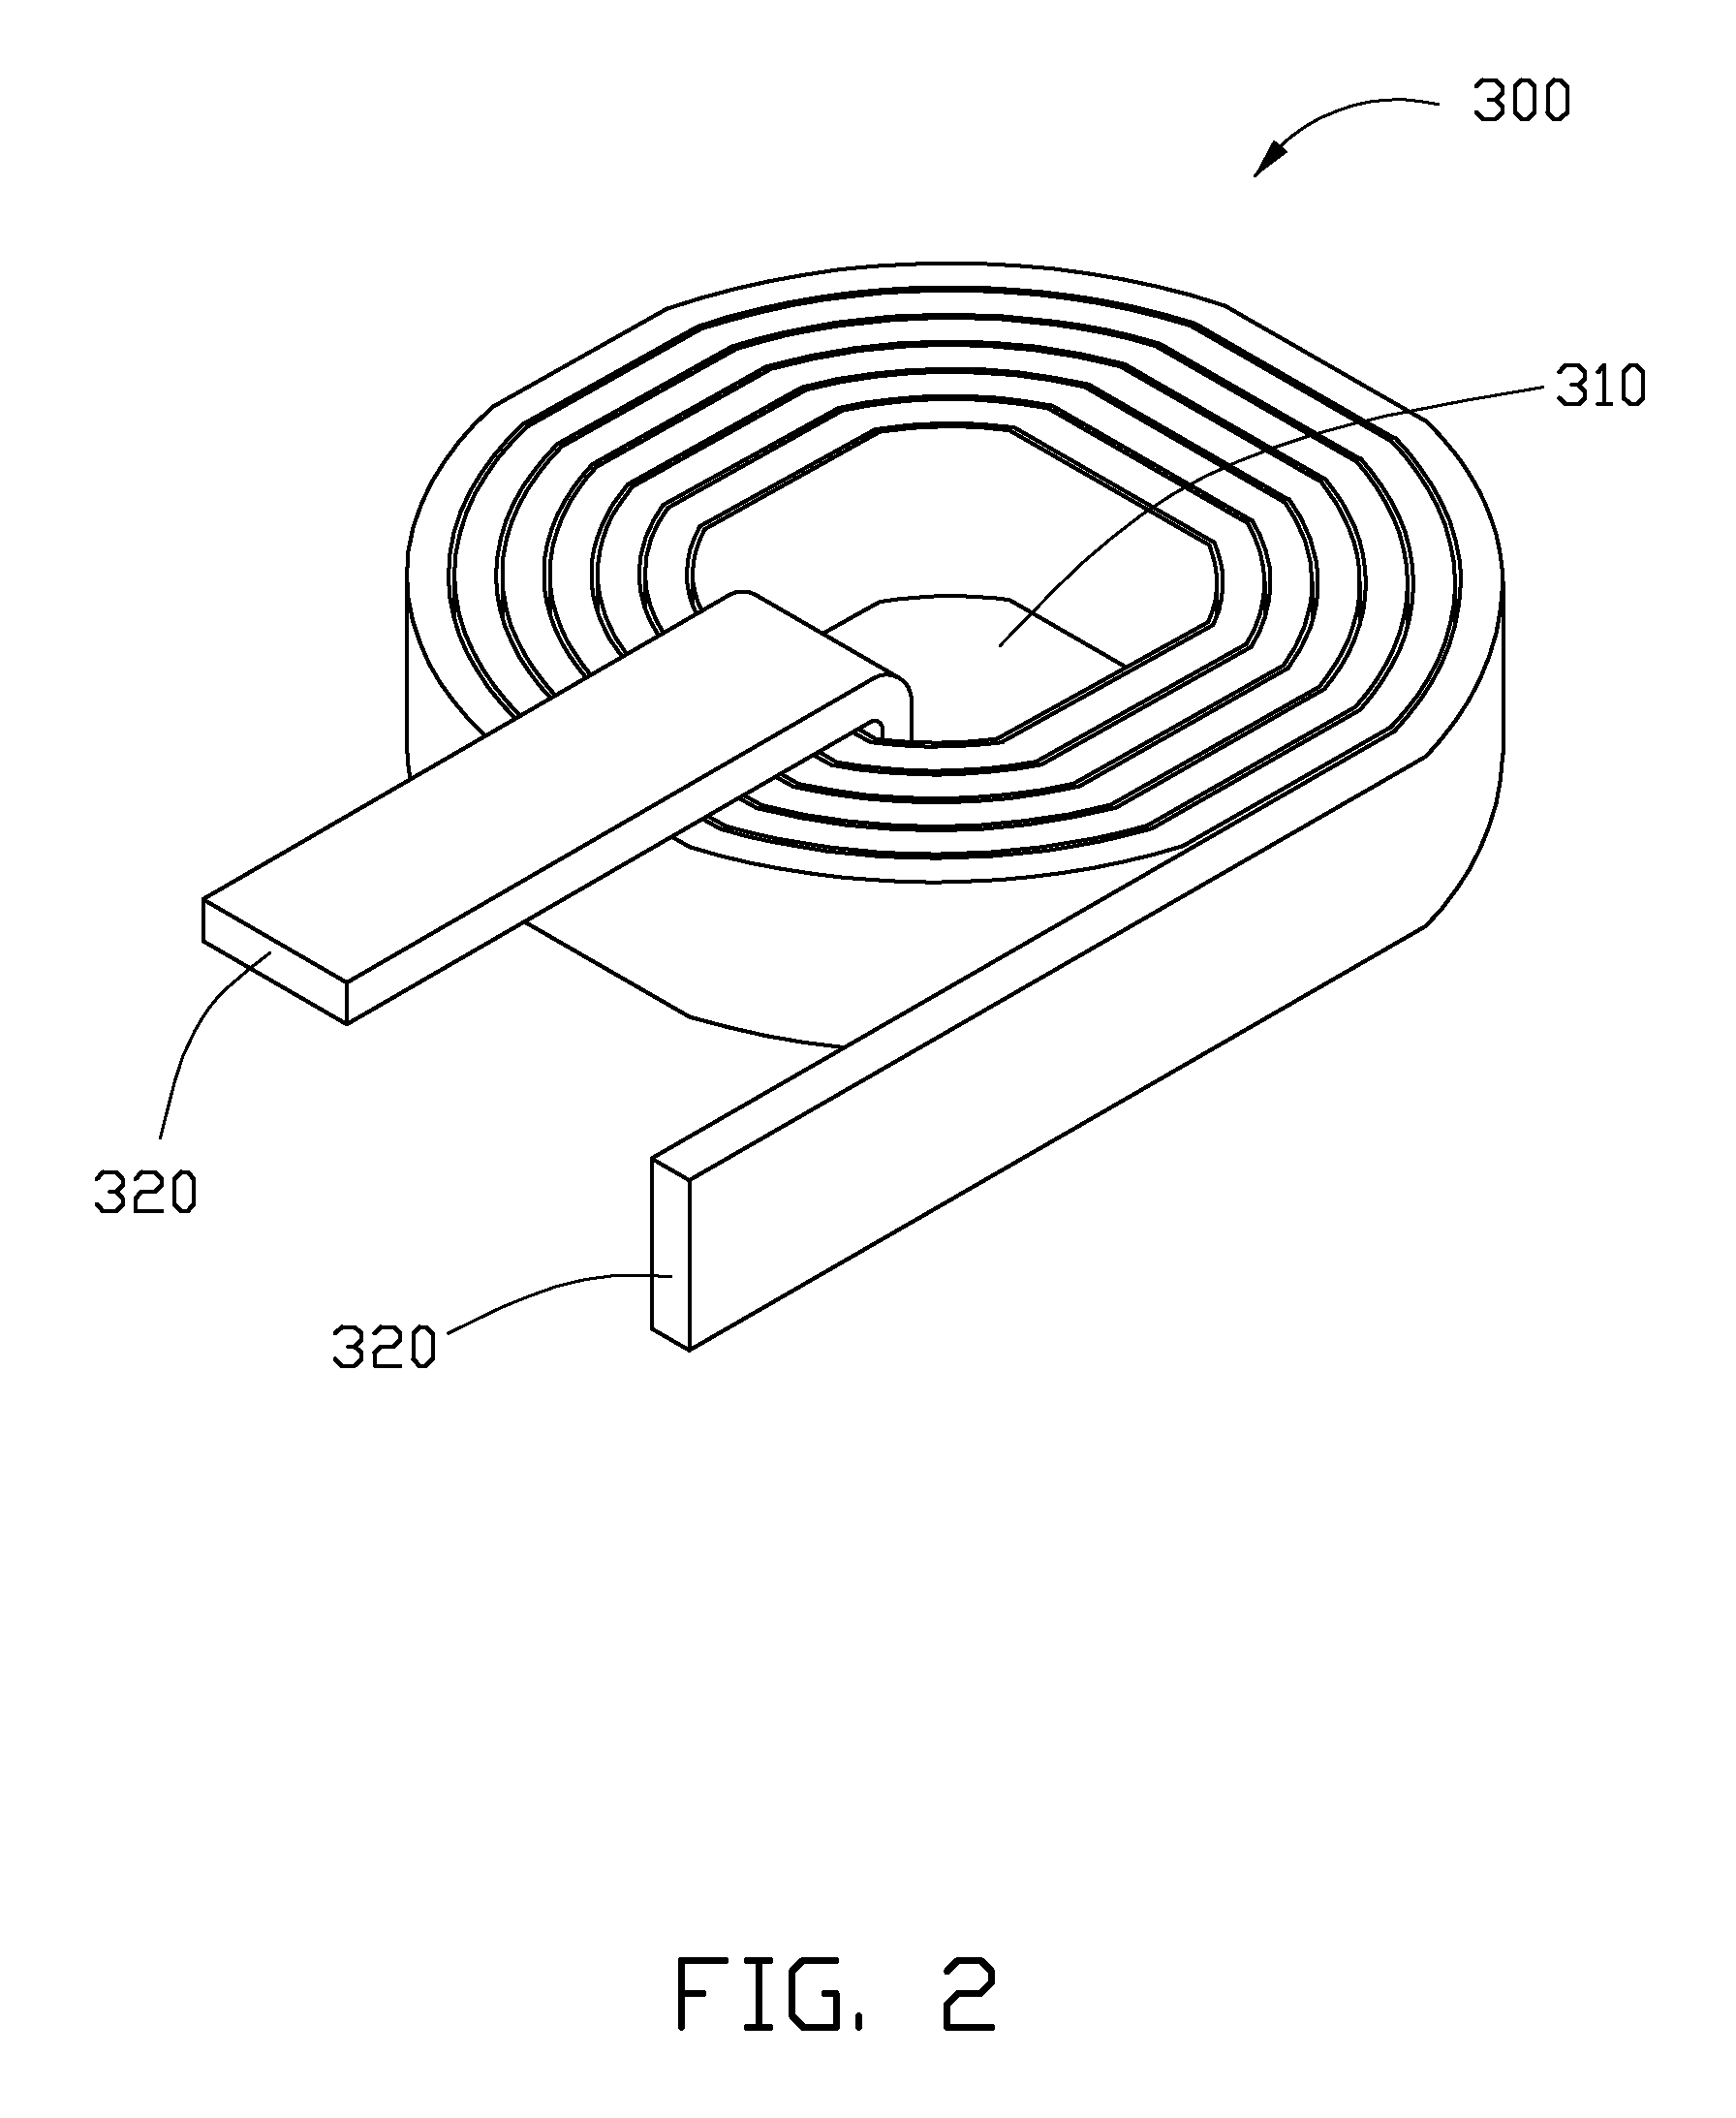 Inductor and inductor coil